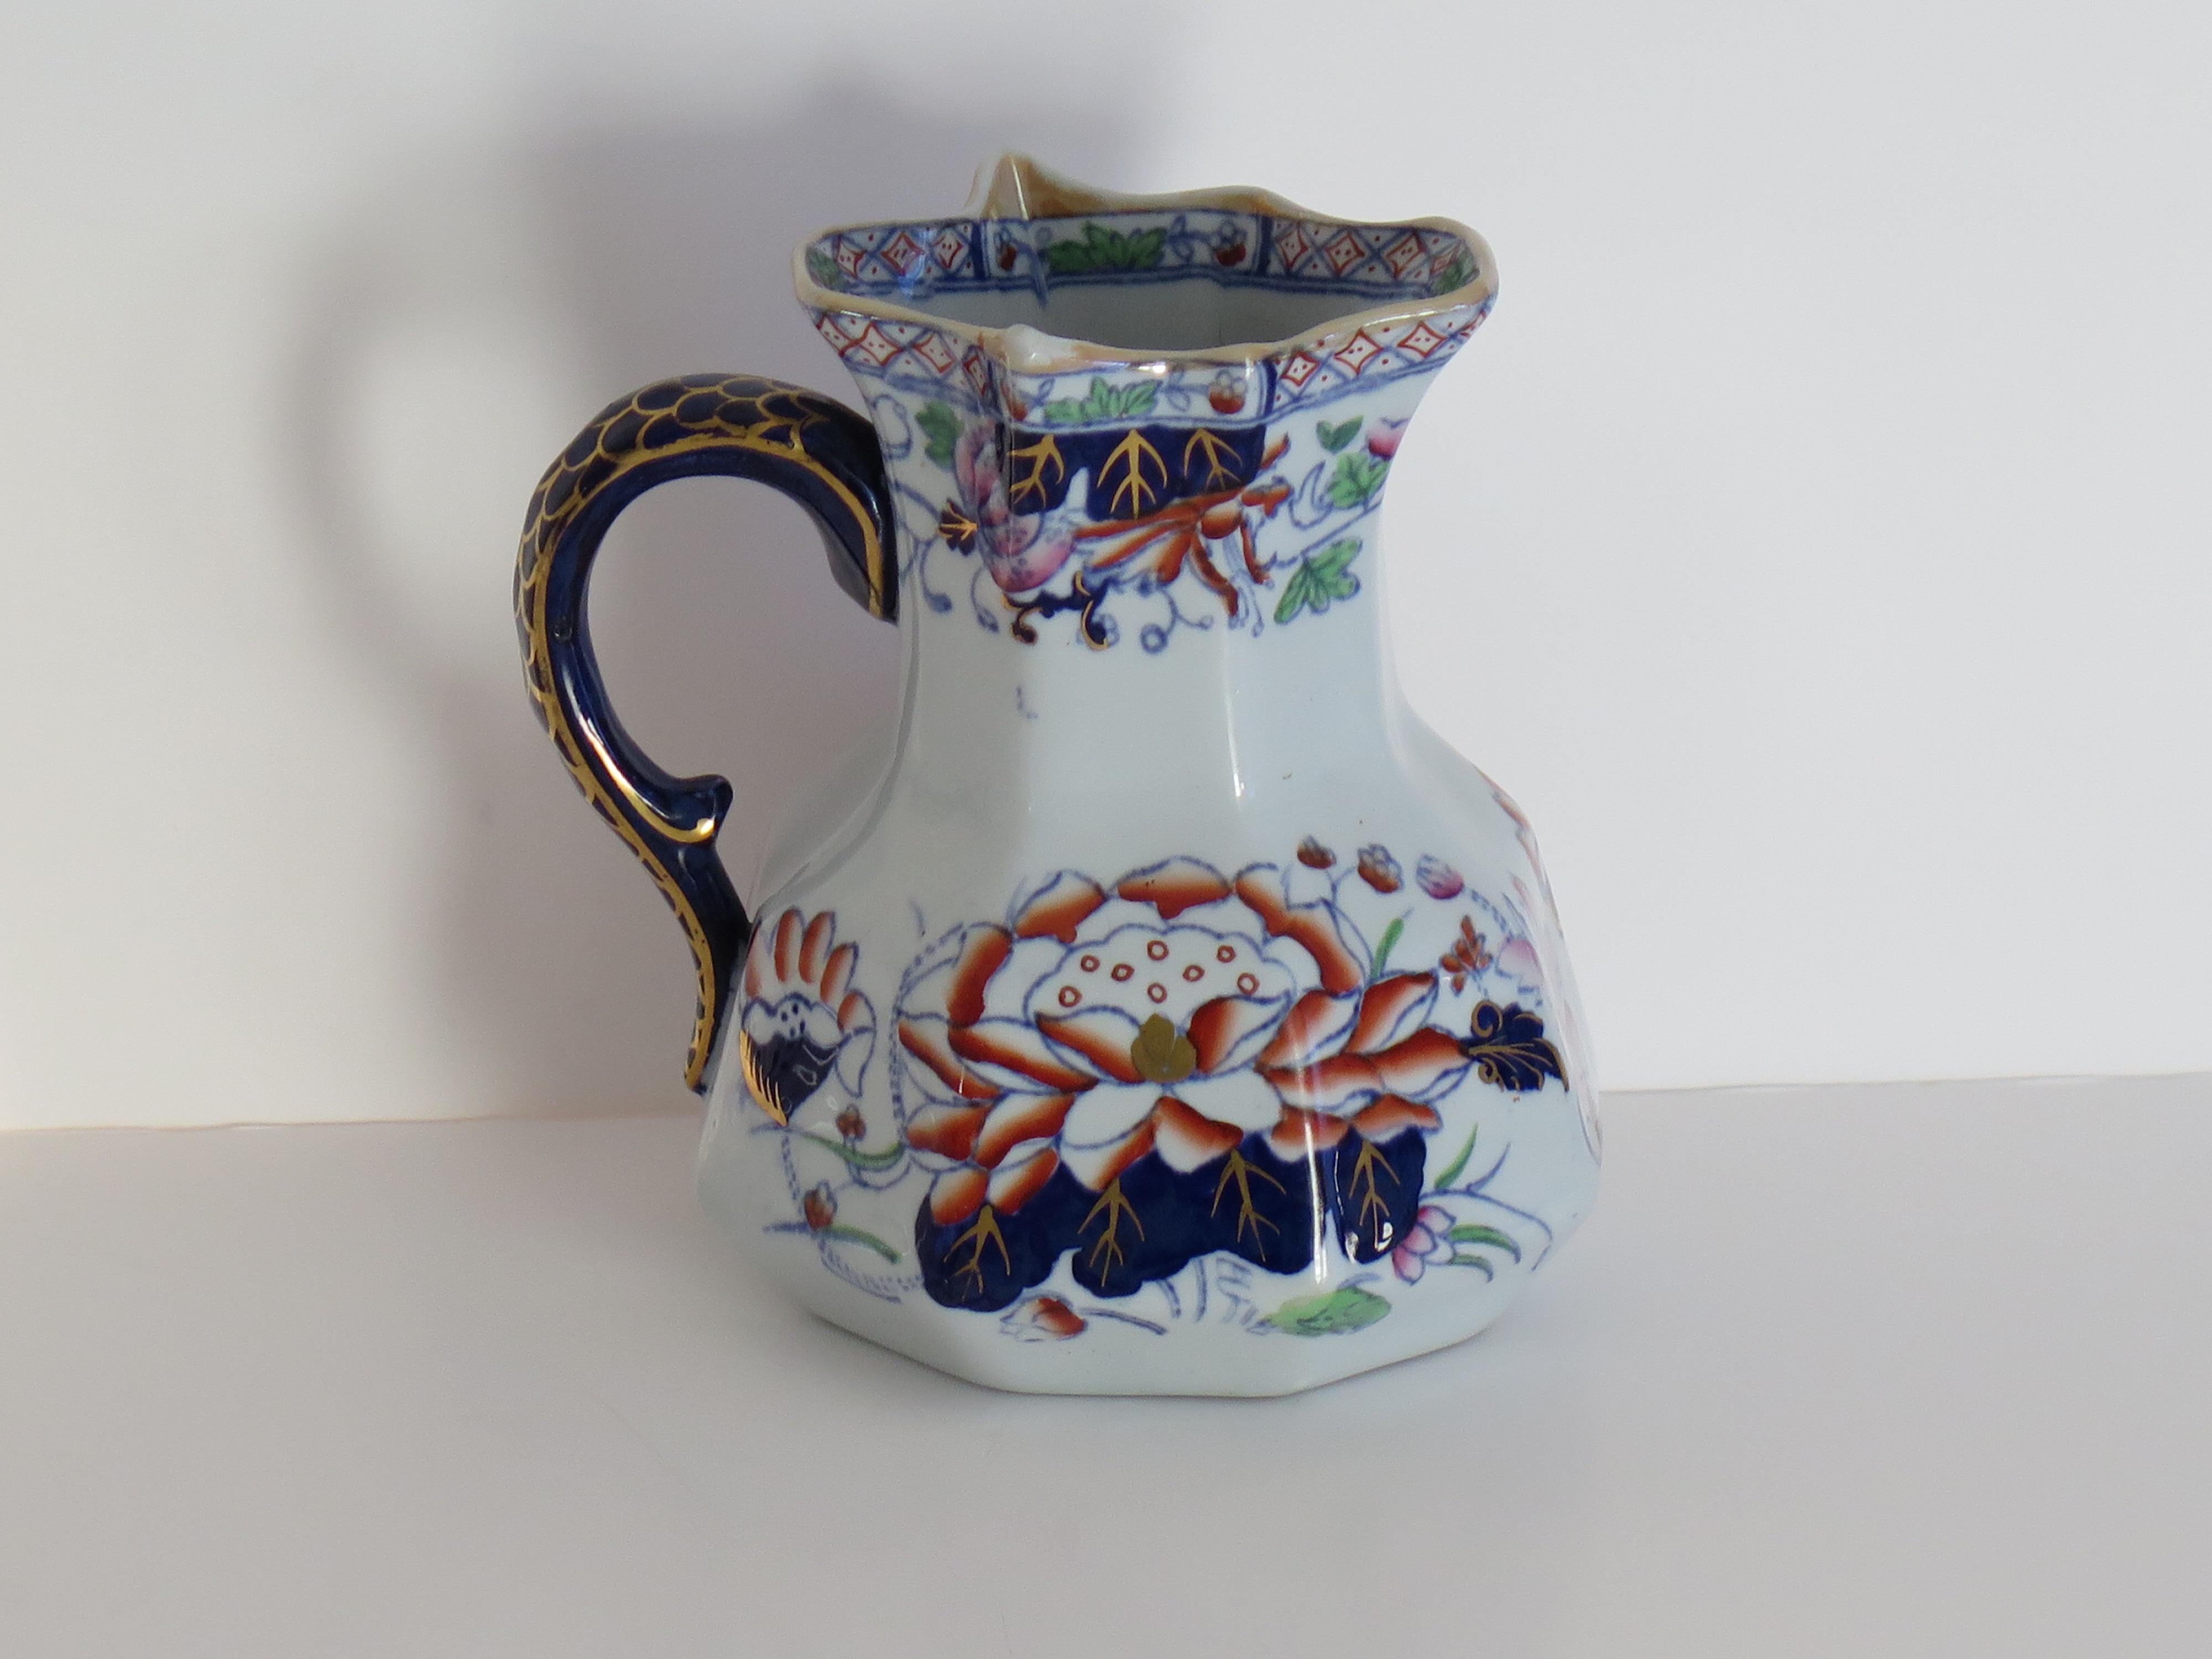 This is a very good jug or pitcher by Mason's ironstone, England, circa 1880.

The jug has the Hydra shape with the snake heads handle with lower spur. 

This jug has one of the very decorative and sought after oriental, Chinoiserie patterns called